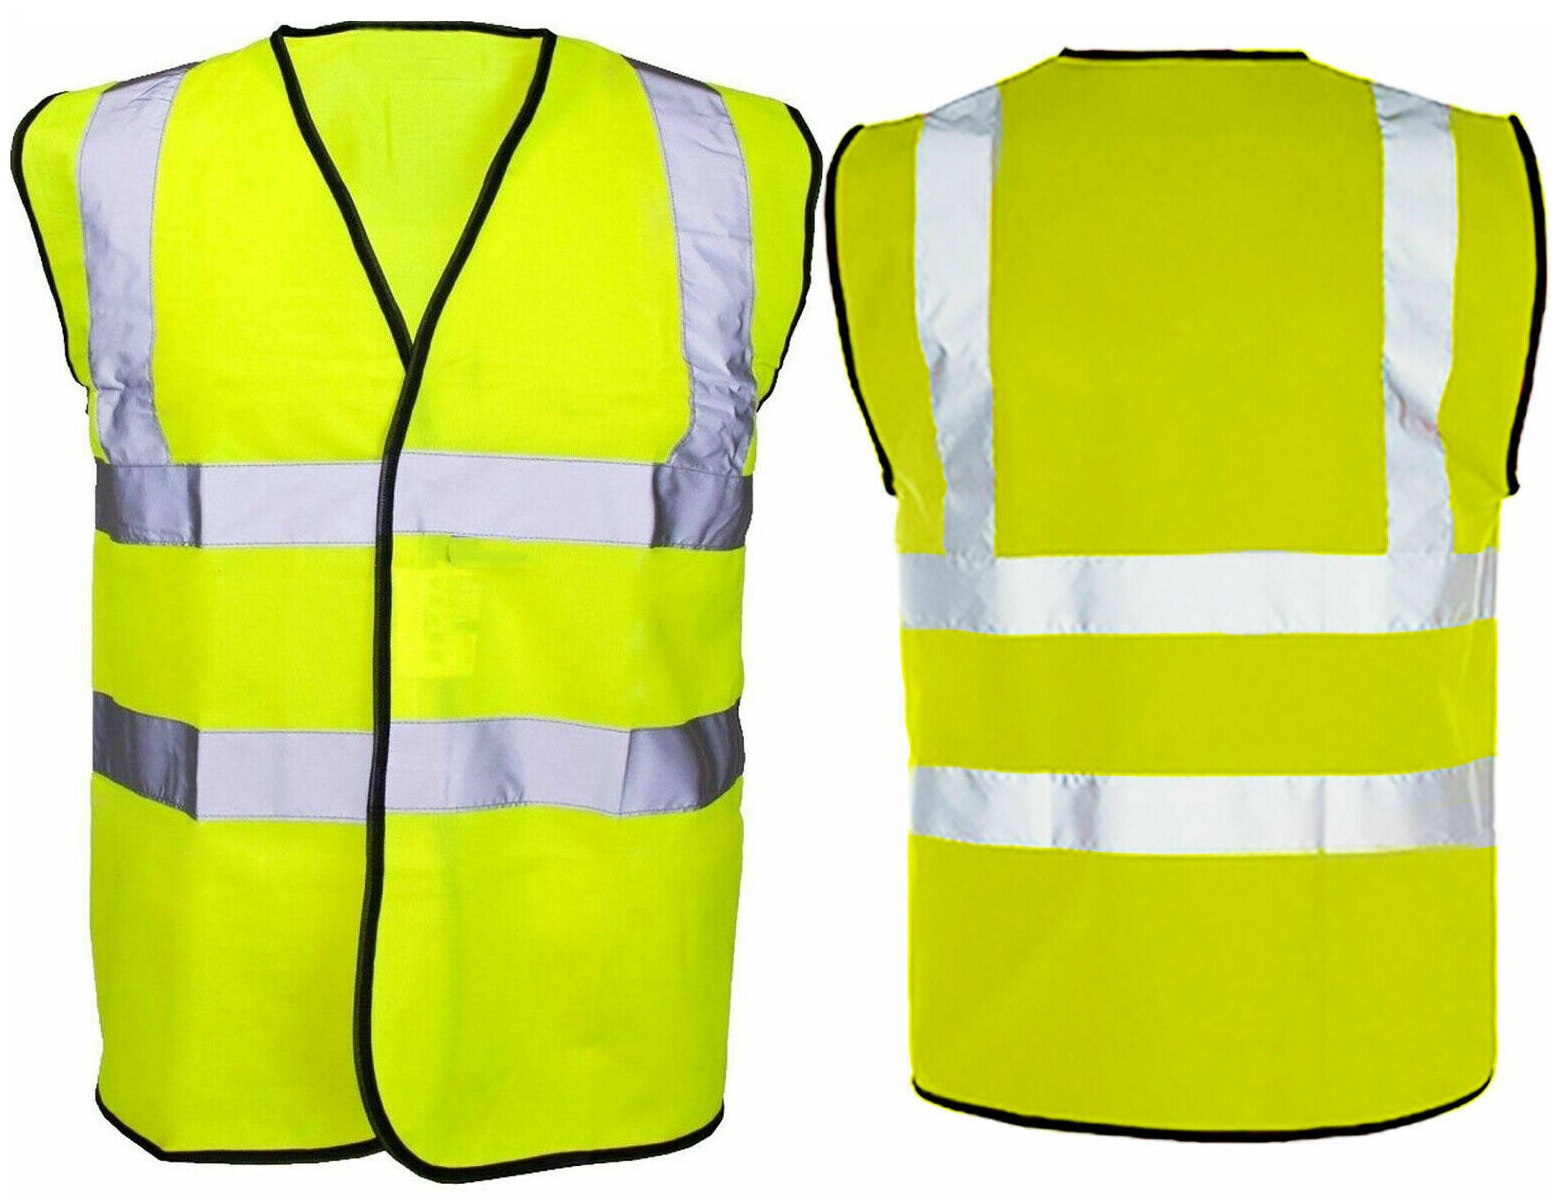 Yellow Small Hi Vis Safety Vest Waistcoat High Visibility Safety Work Wear Reflective Without Pockets